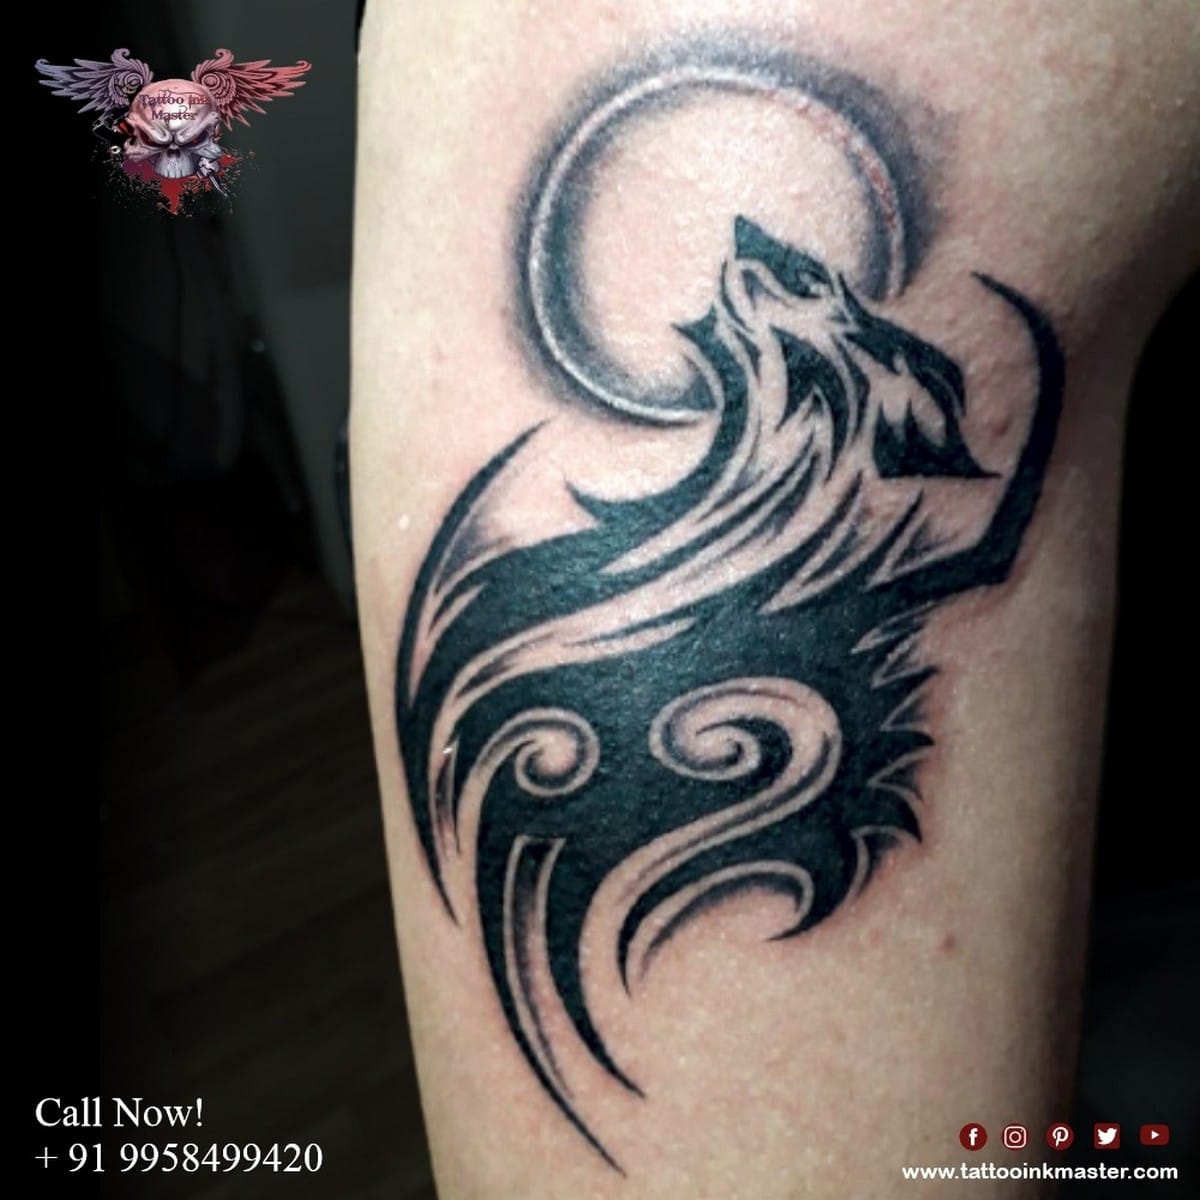 You are currently viewing Creative Circle Artistic Tattoo